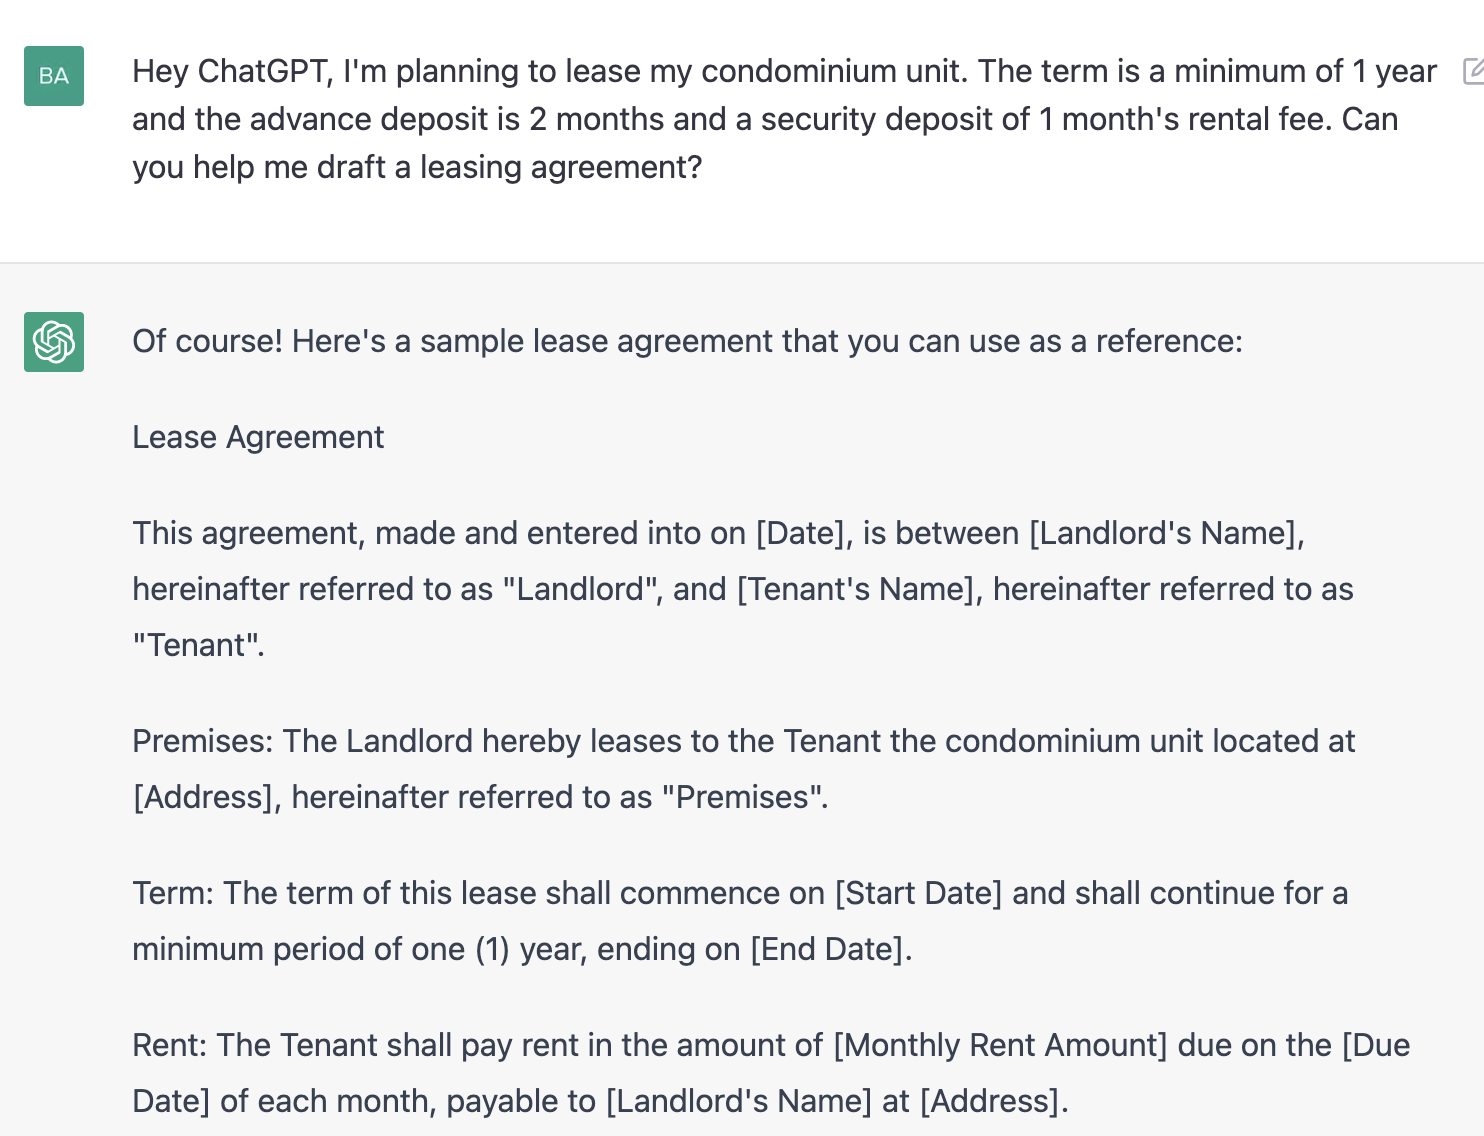 ChatGPT prompt about drafting a leasing agreement